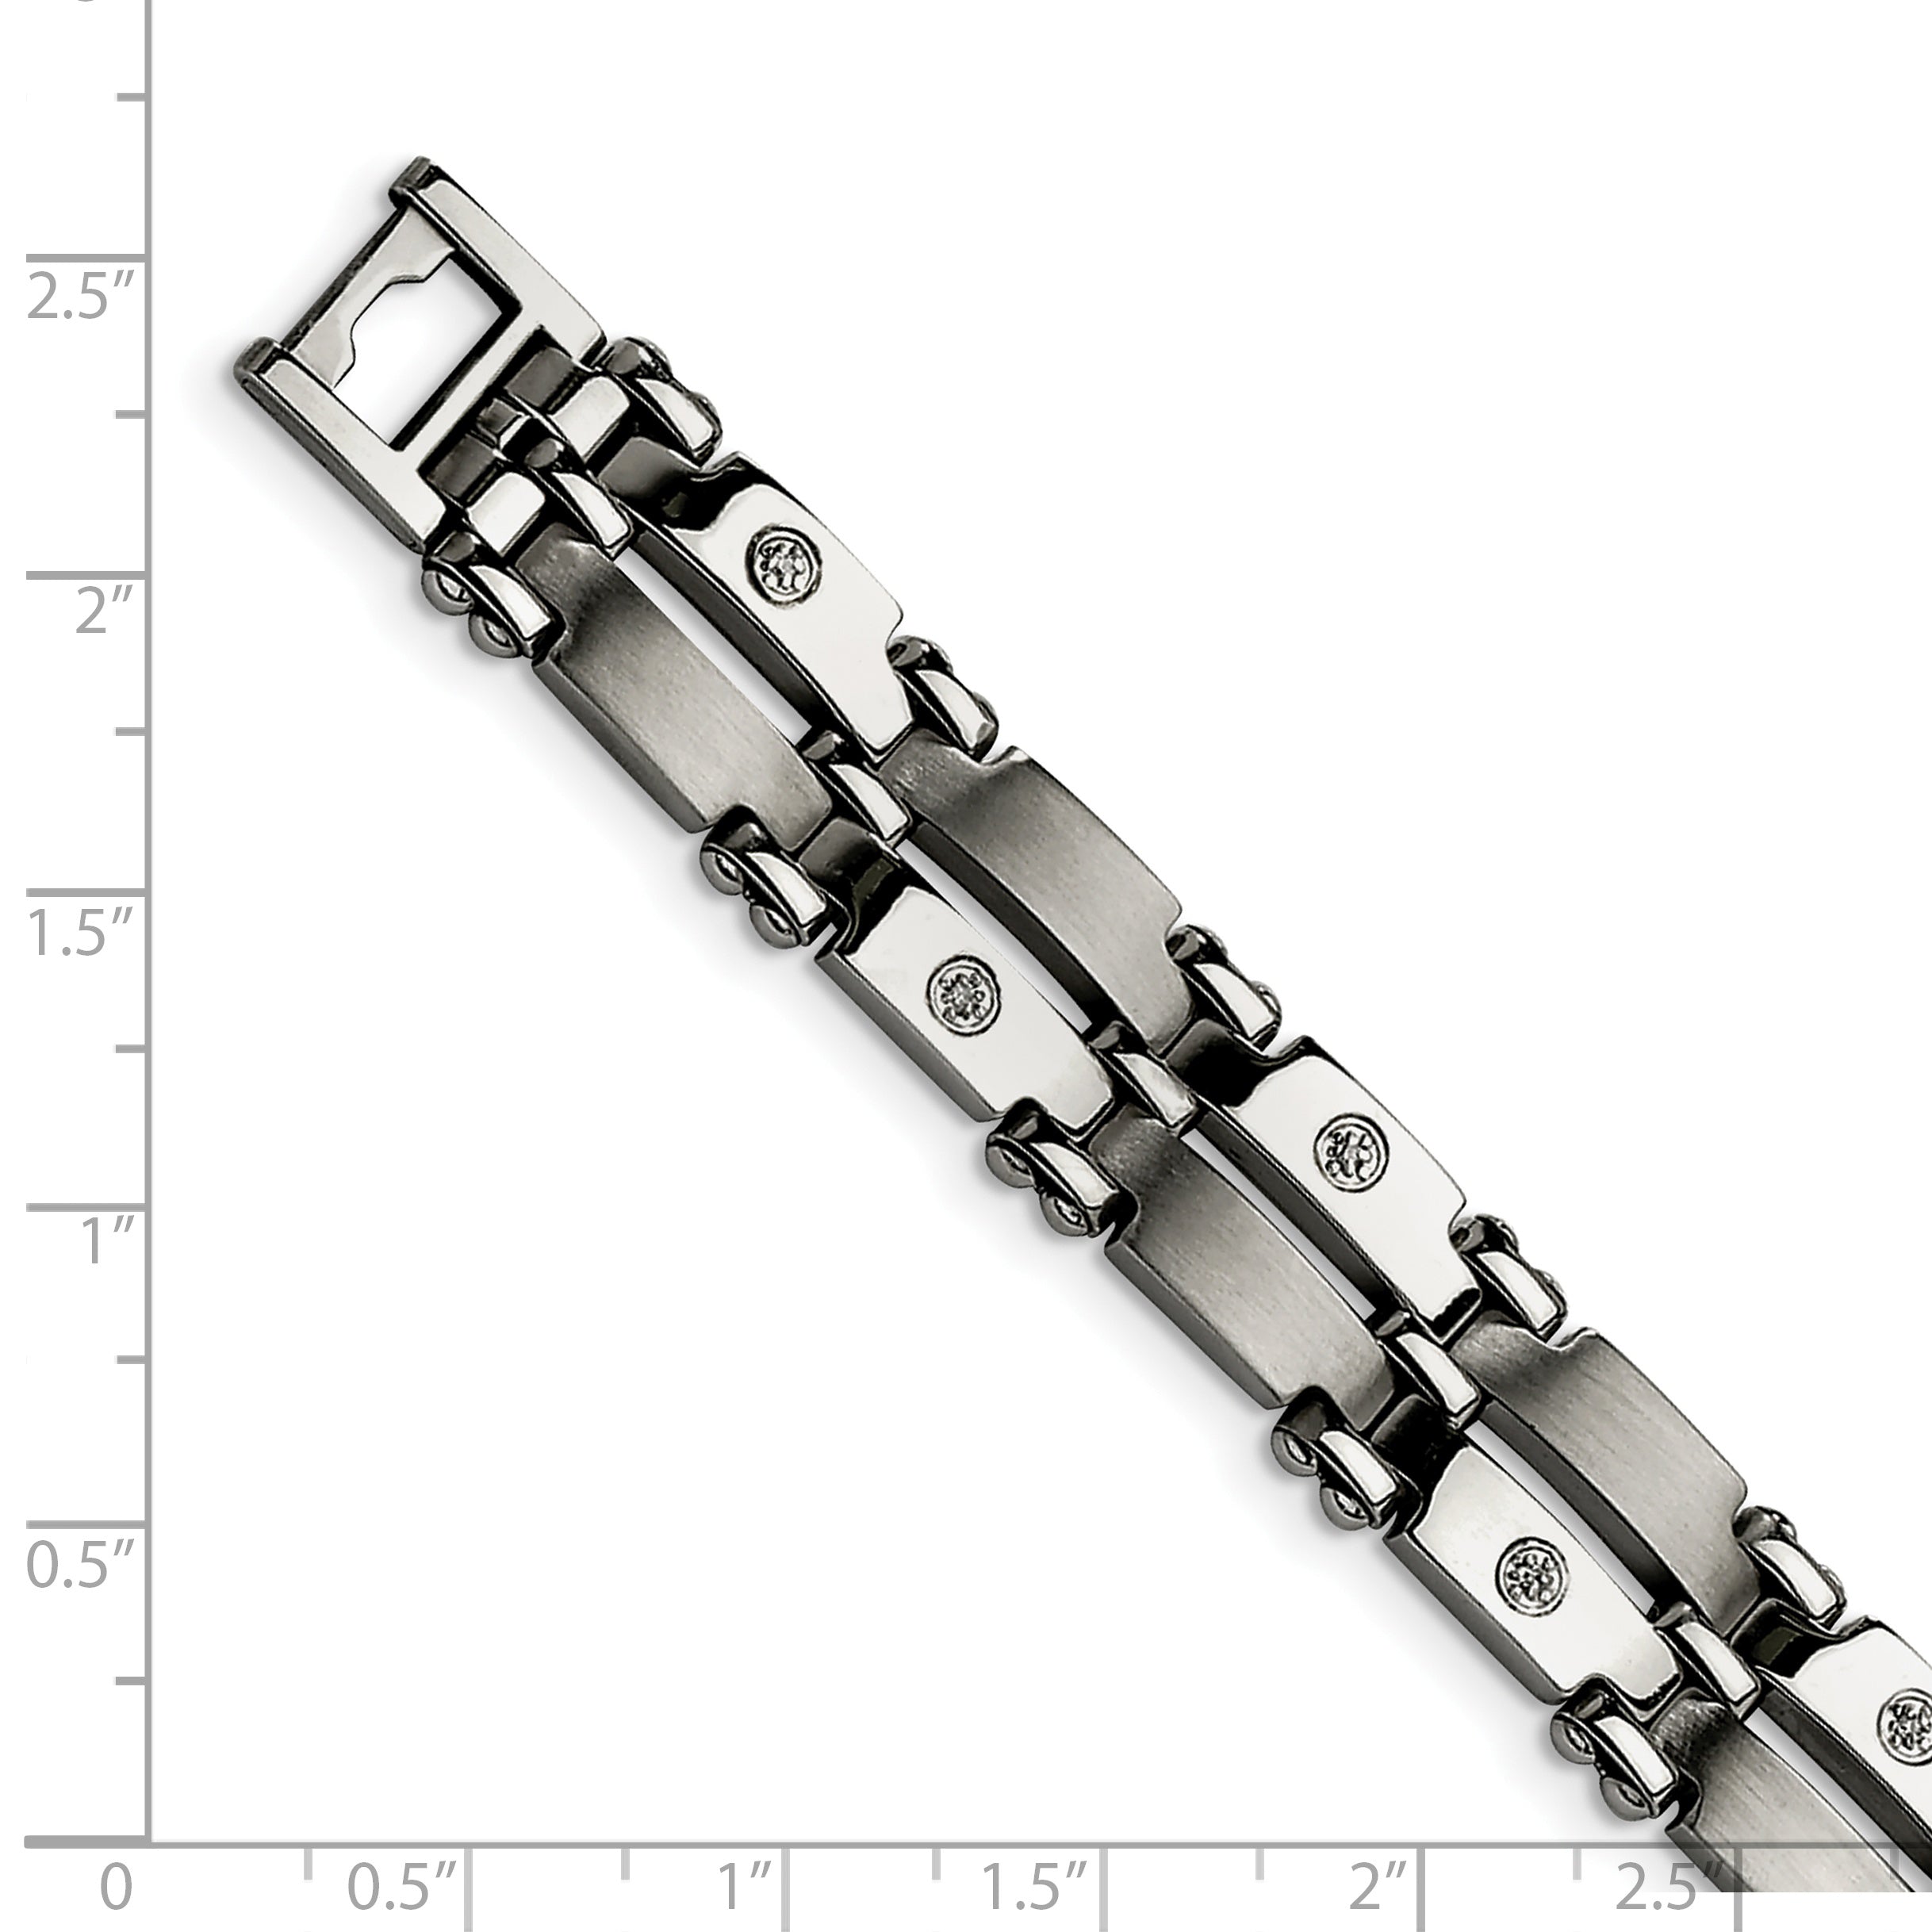 Chisel Stainless Steel Brushed and Polished with Rhodium-plated 14k White Gold and 1/20 carat Diamond 8.5 inch Bracelet